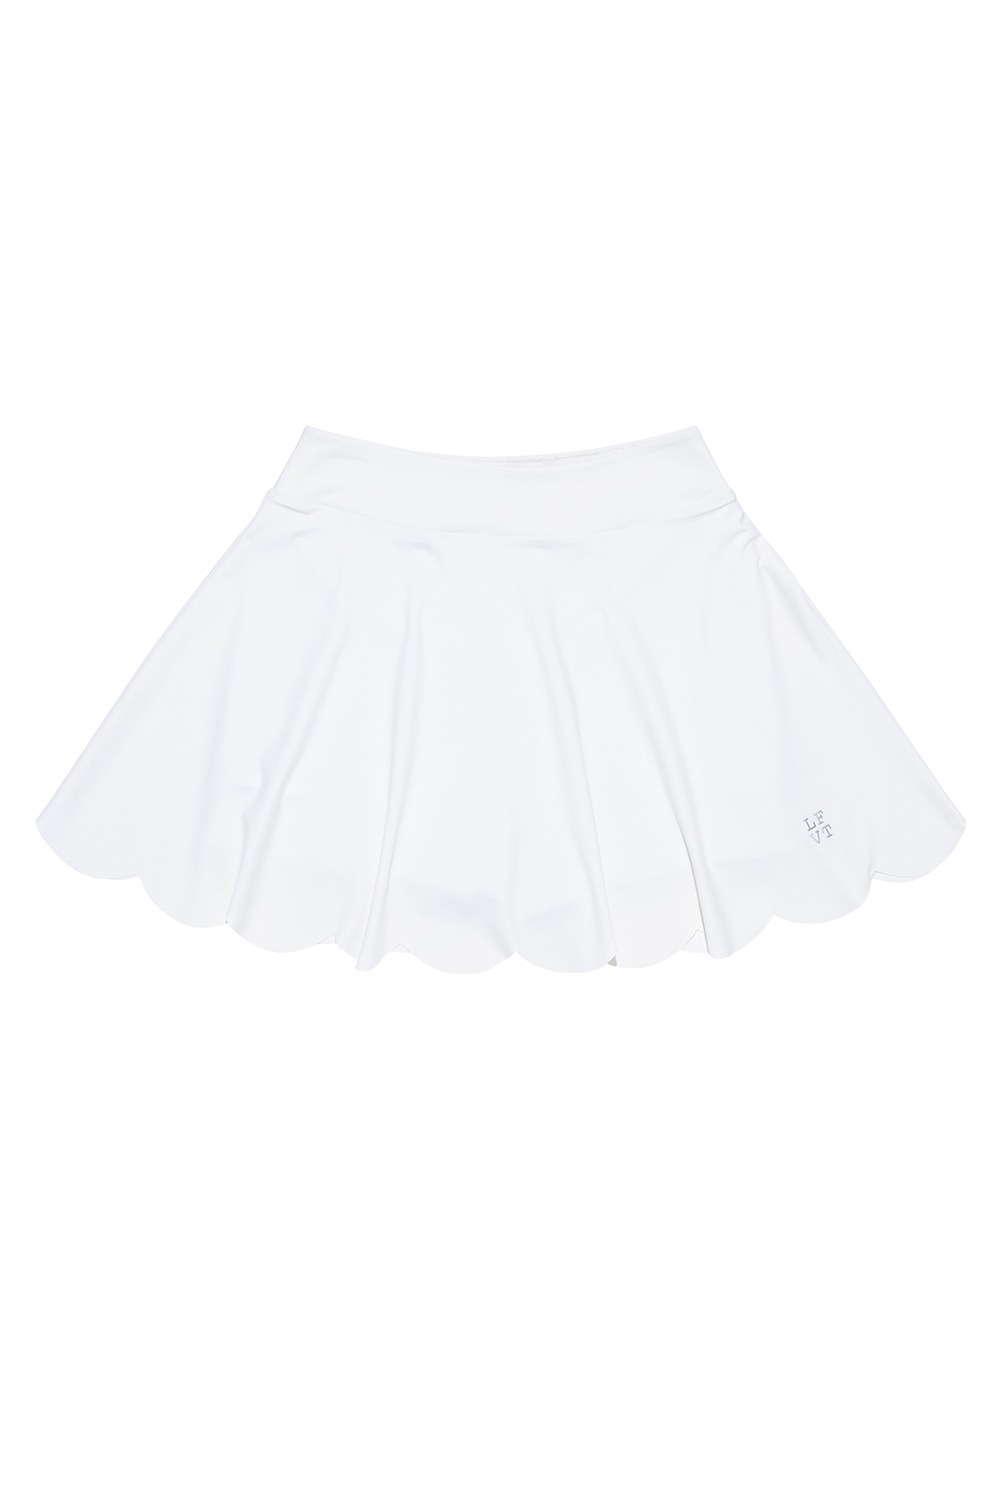 LOVEFORTY WAVE TENNIS SKIRT (IOVRY) RICHEZ